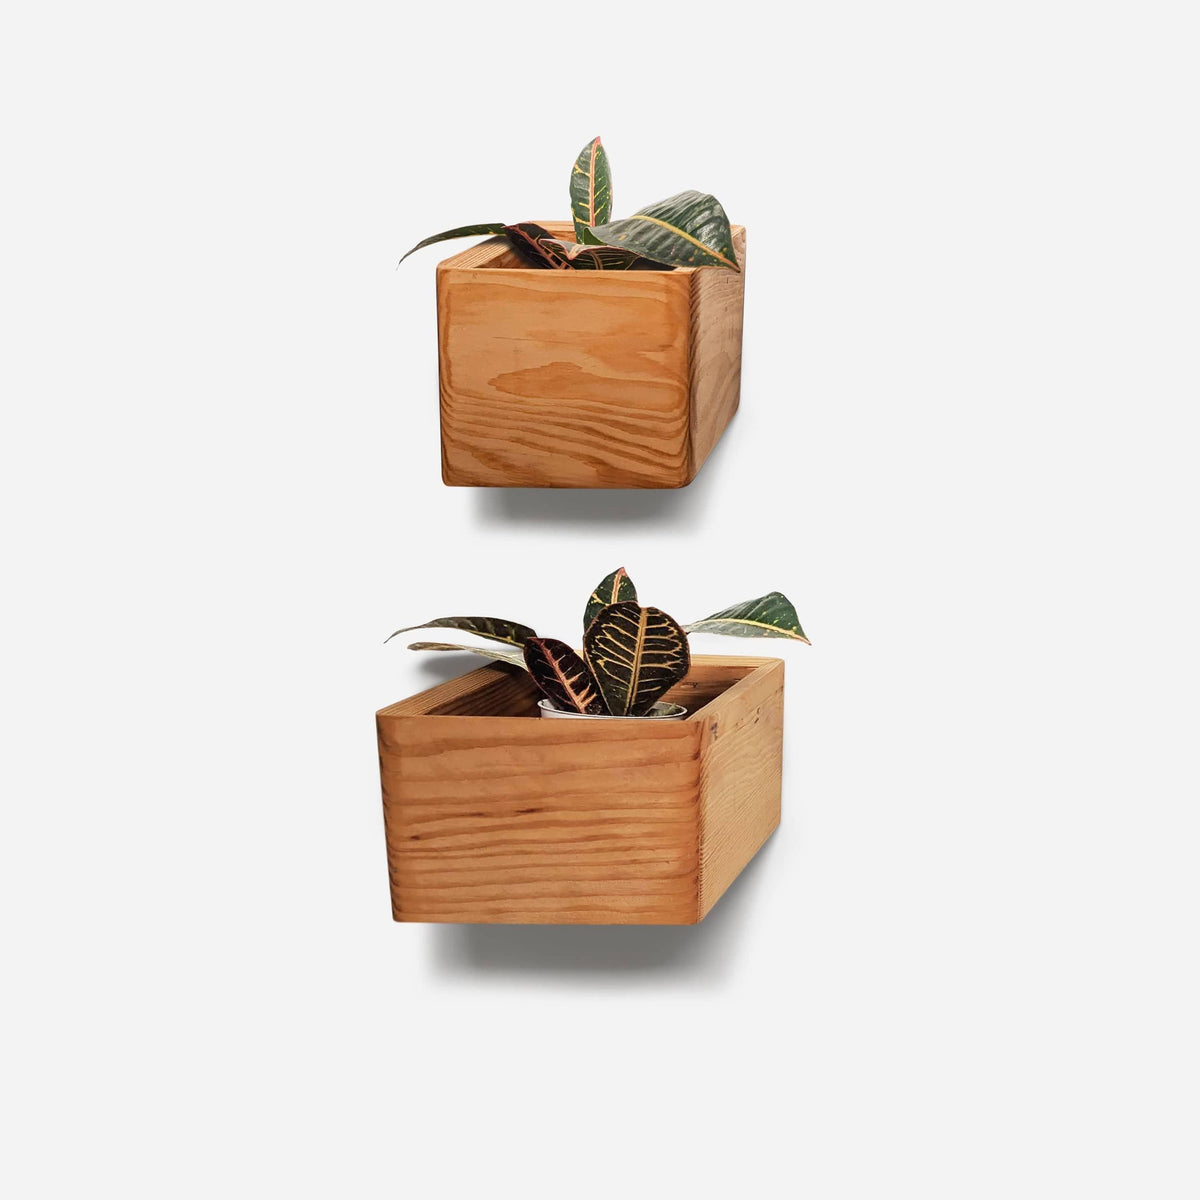 Formr Diamond Self-Watering, Wall-Mounted Planter by Formr